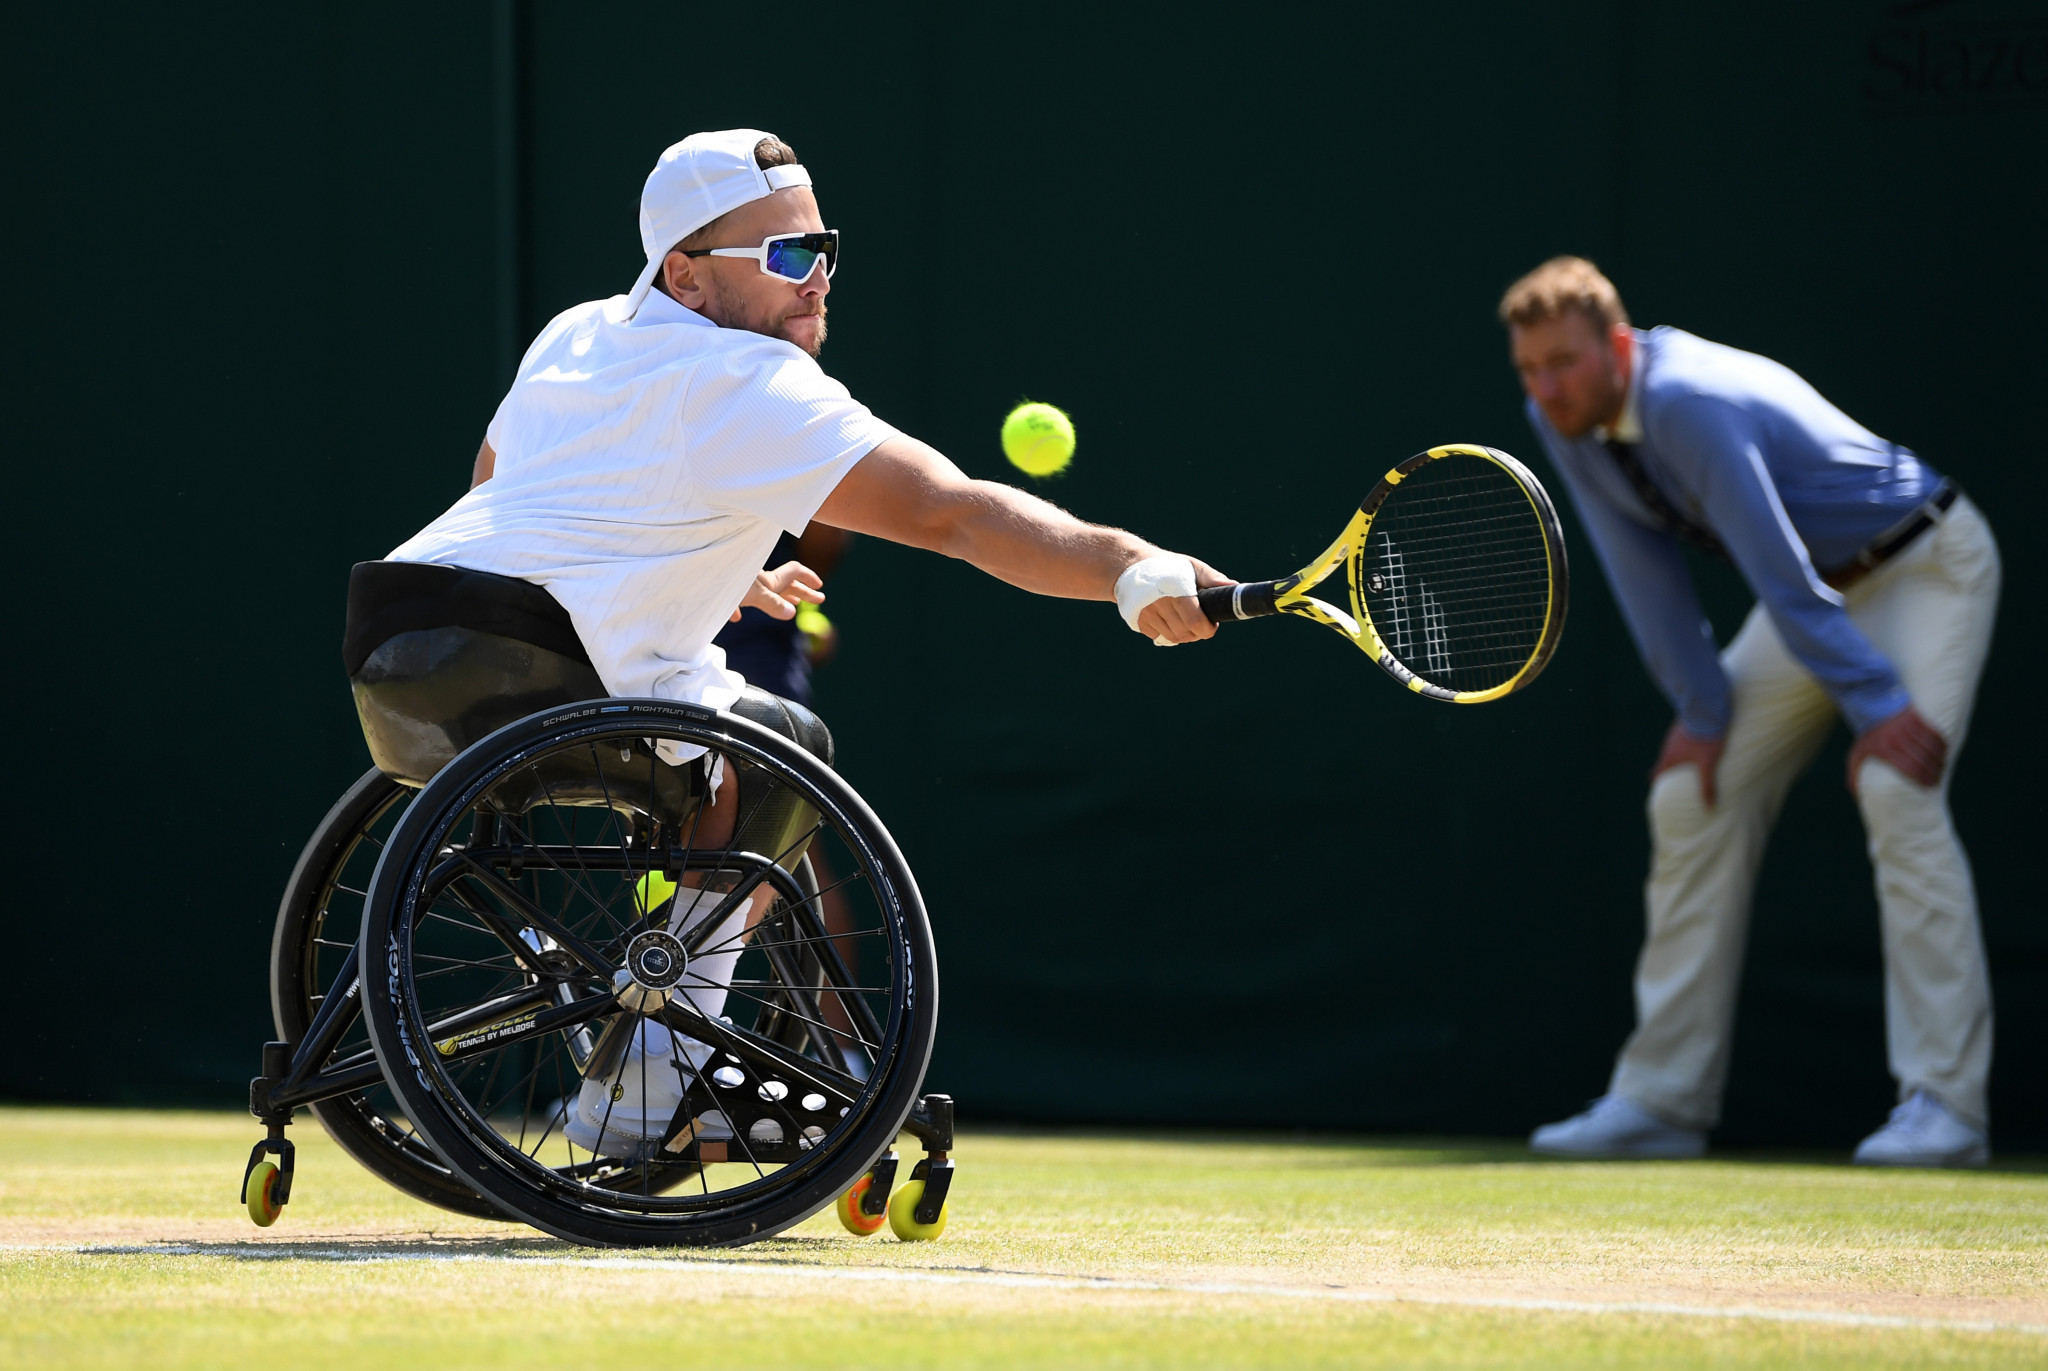 Doubles partners Dylan Alcott, pictured, and Andy Lapthorne progressed to the singles final as quad wheelchair tennis made its competitive debut at Wimbledon today ©Getty Images